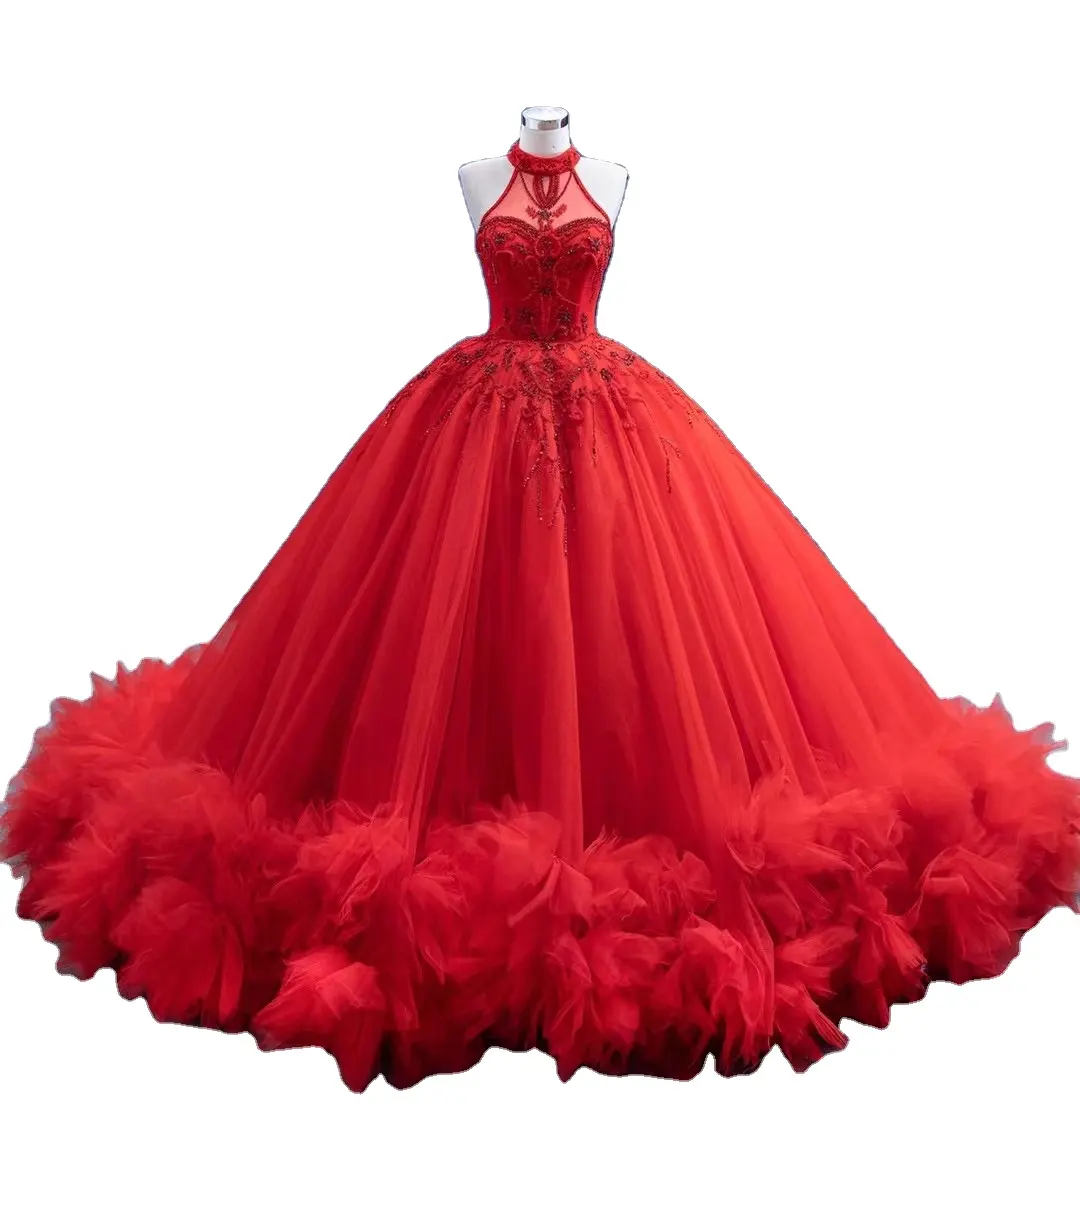 Feishiluo Wholesale Red Prom party dress Wholesale bridal ball gowns tulle ball gowns luxury wedding dress Custom Made